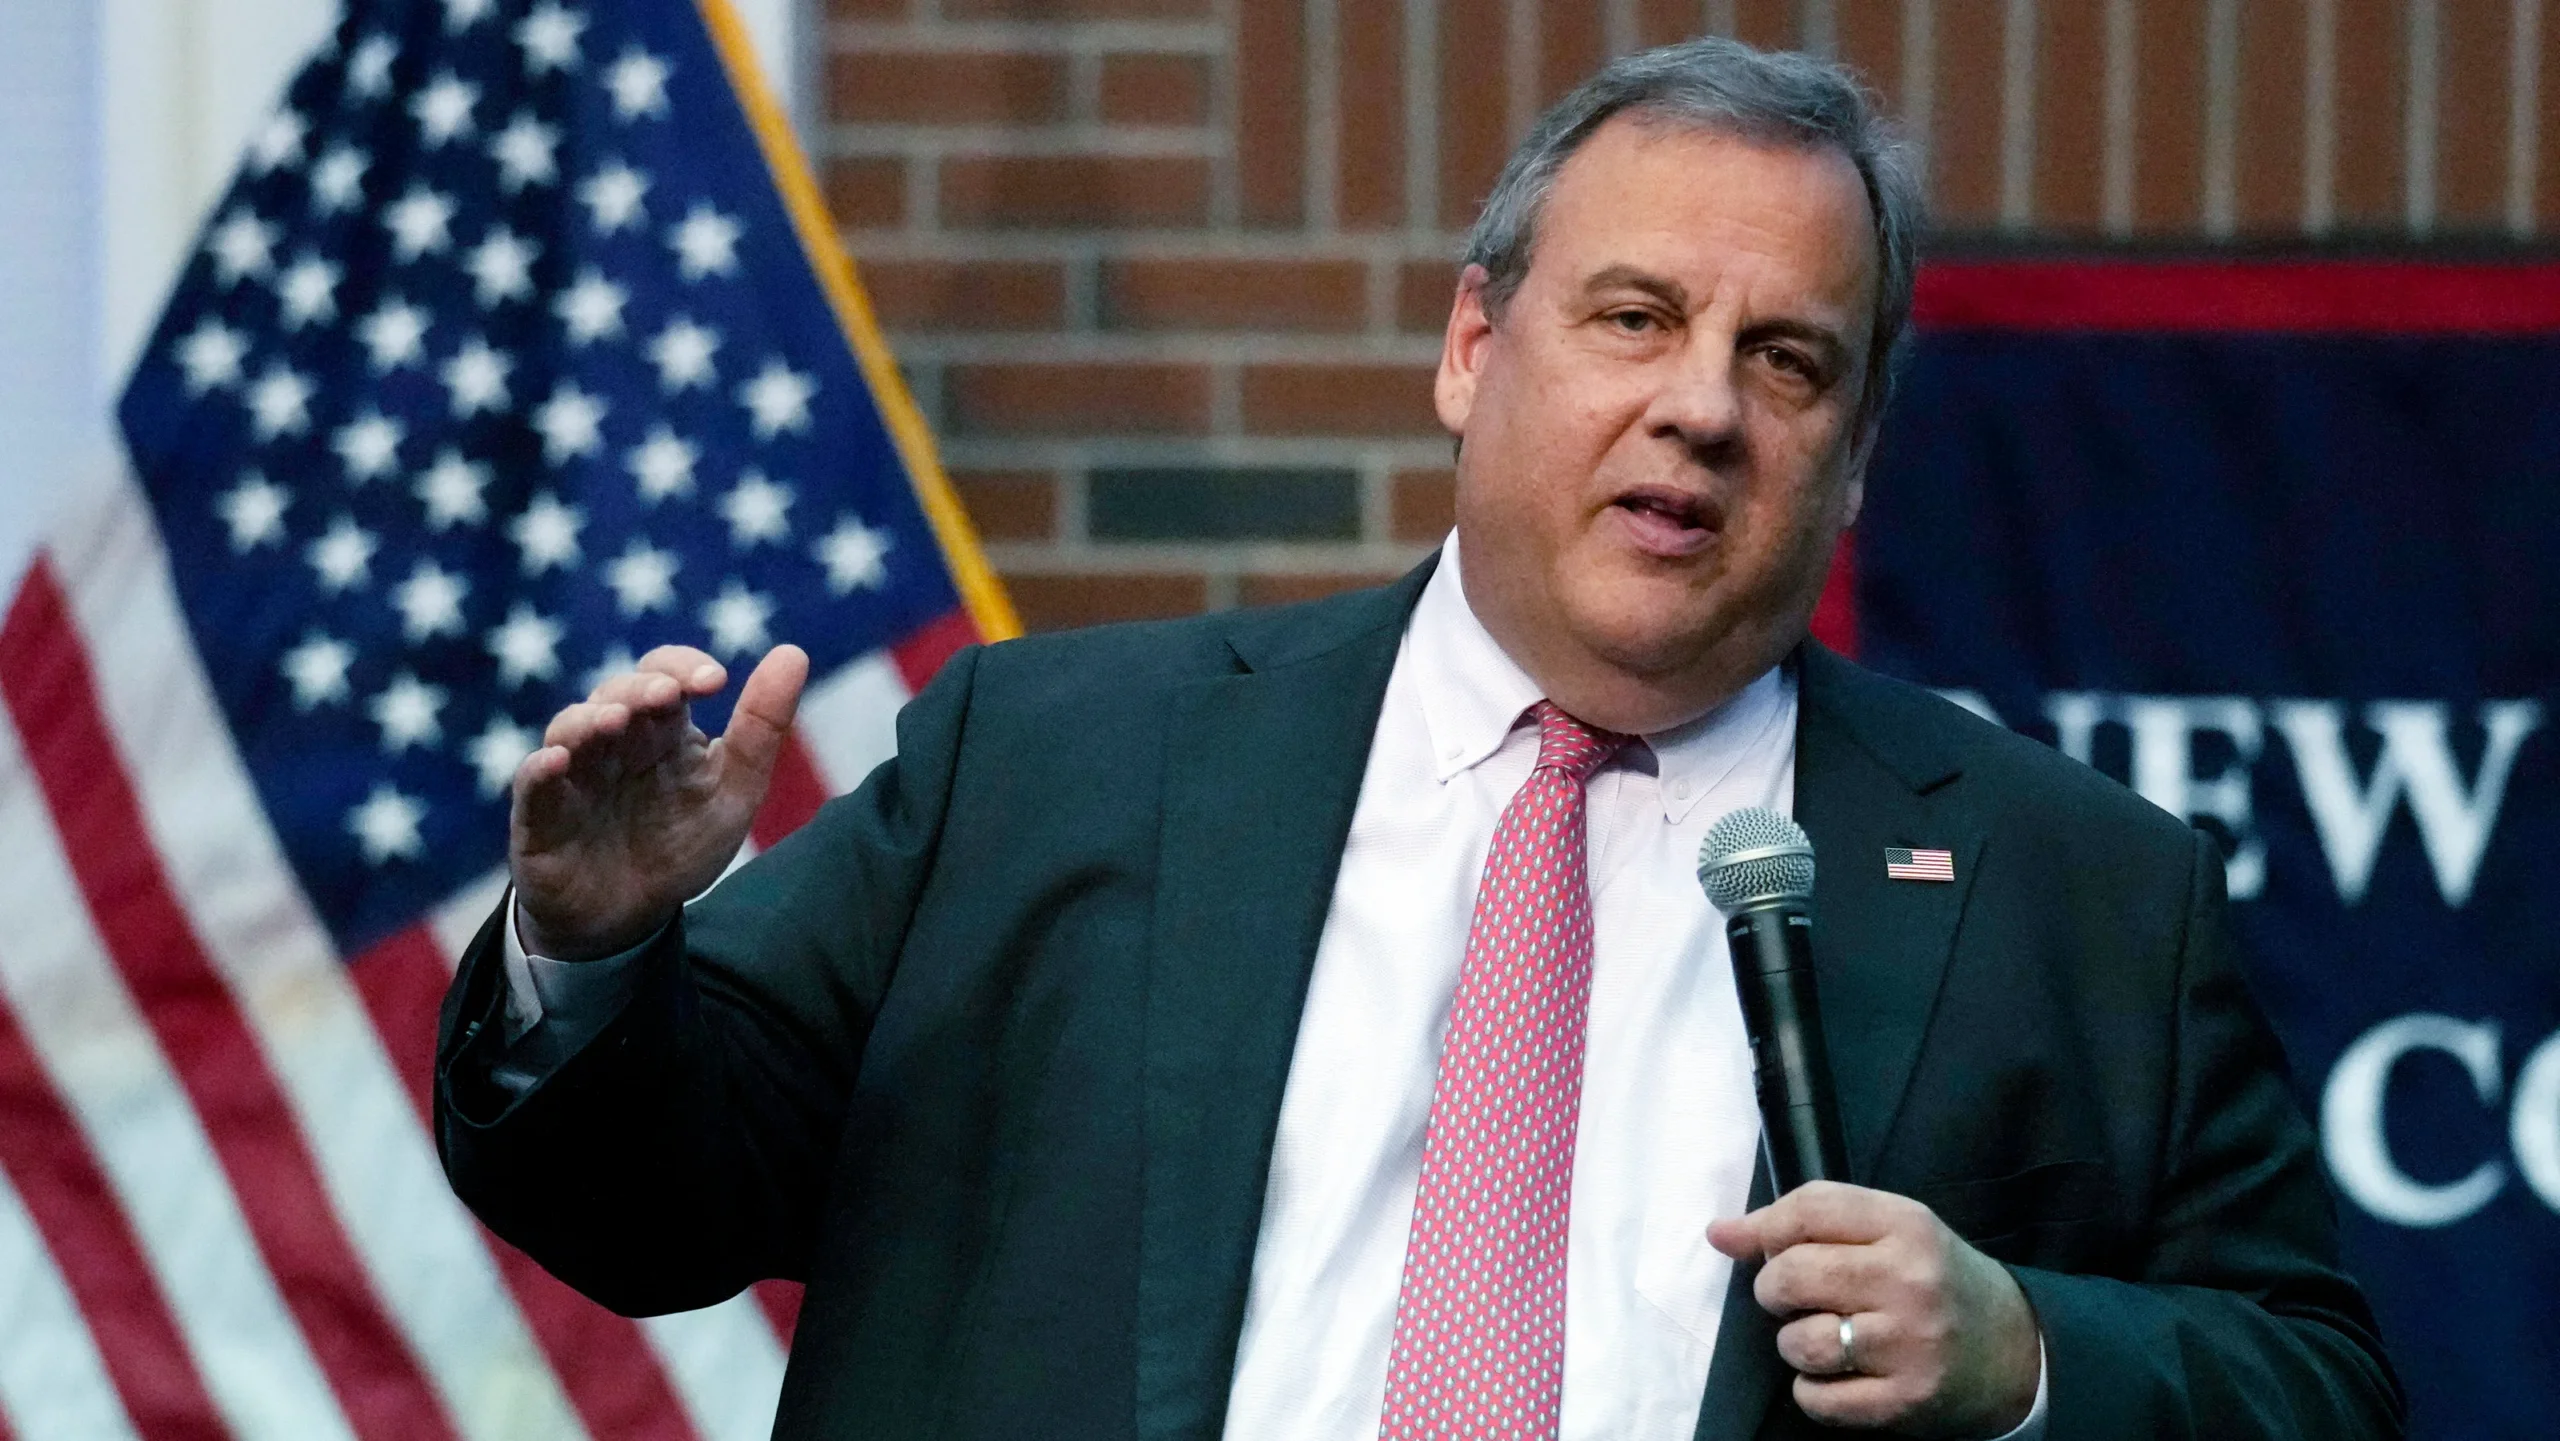 Former NJ Governor Chris Christie Announces Candidacy for 2024 US Presidential Election